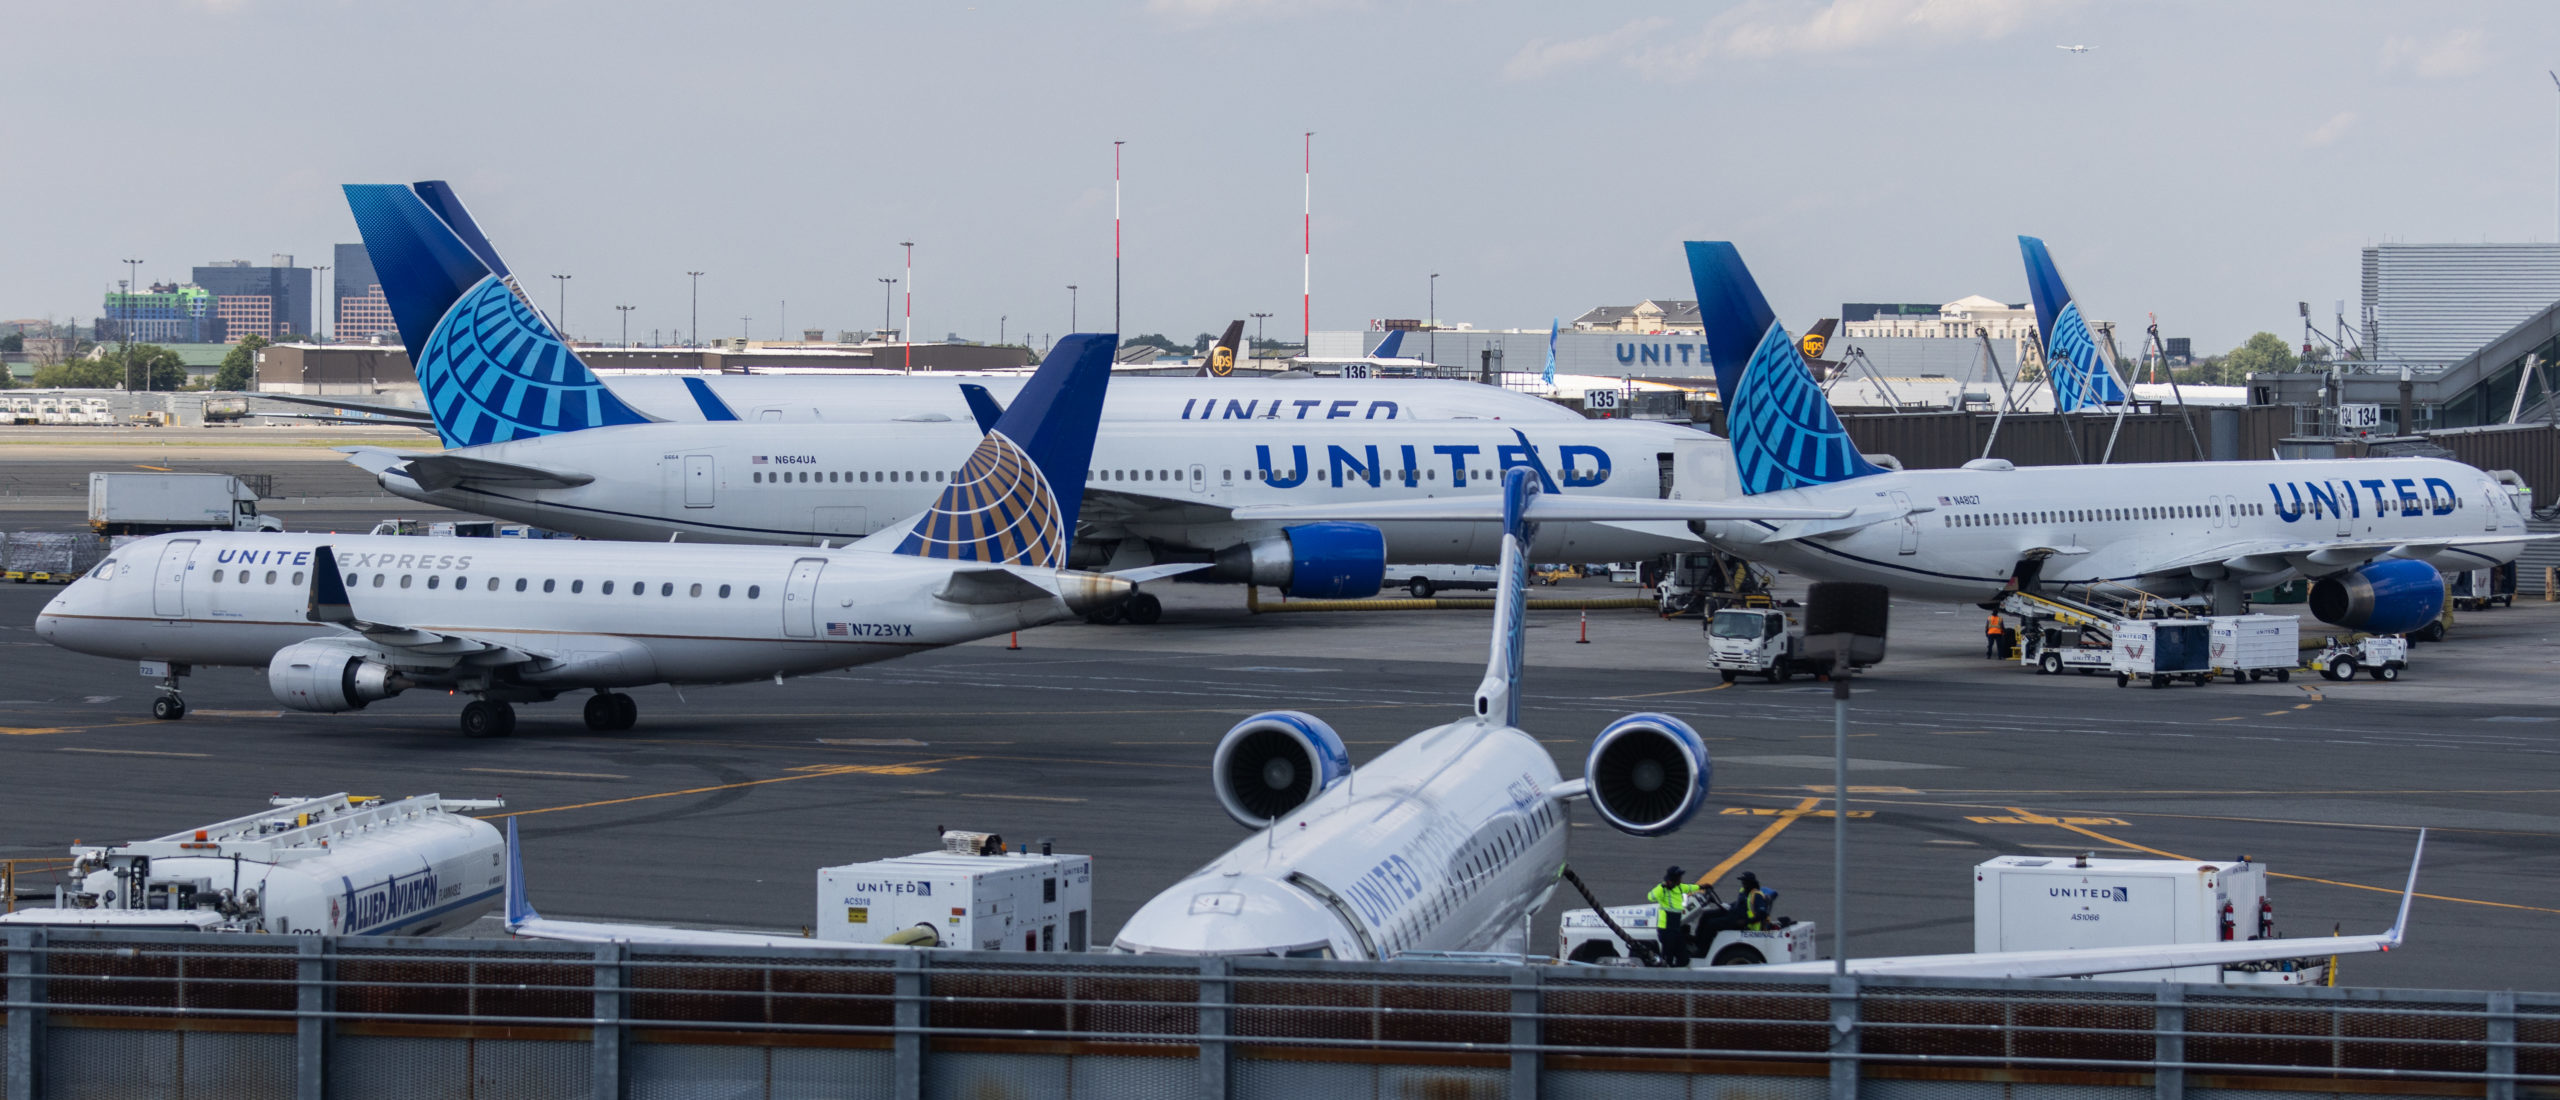 NEWARK, NJ - JULY 01: United Airlines aircraft are seen at Newark Liberty International Airport (EWR) on July 1, 2022 in Newark, New Jersey. (Photo by Jeenah Moon/Getty Images)